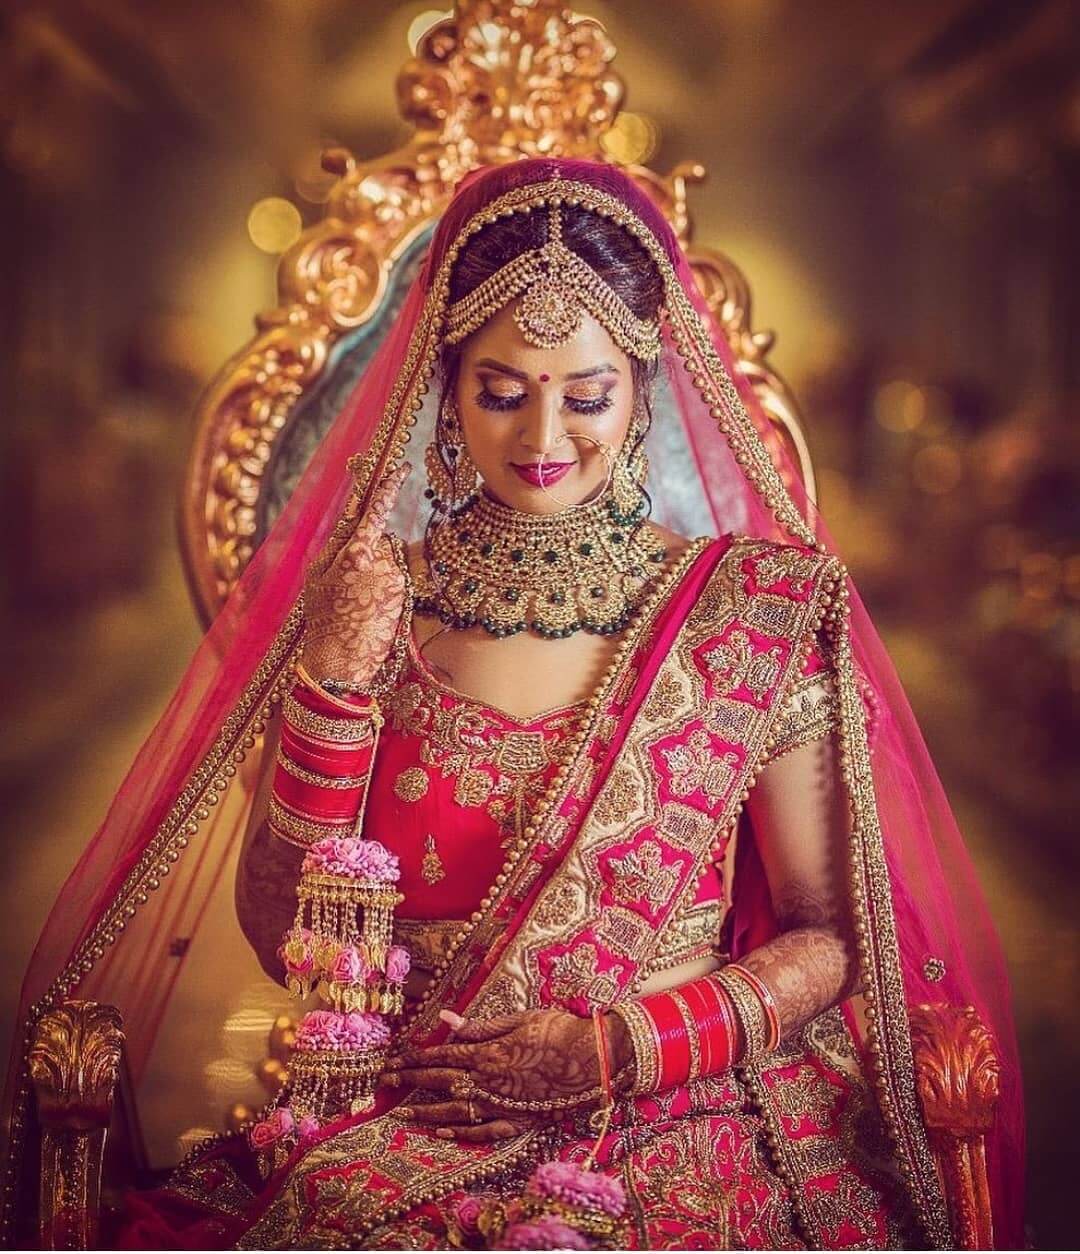 21 Dulhan Makeup For Wedding Ideas To Ace Your Bridal Look!